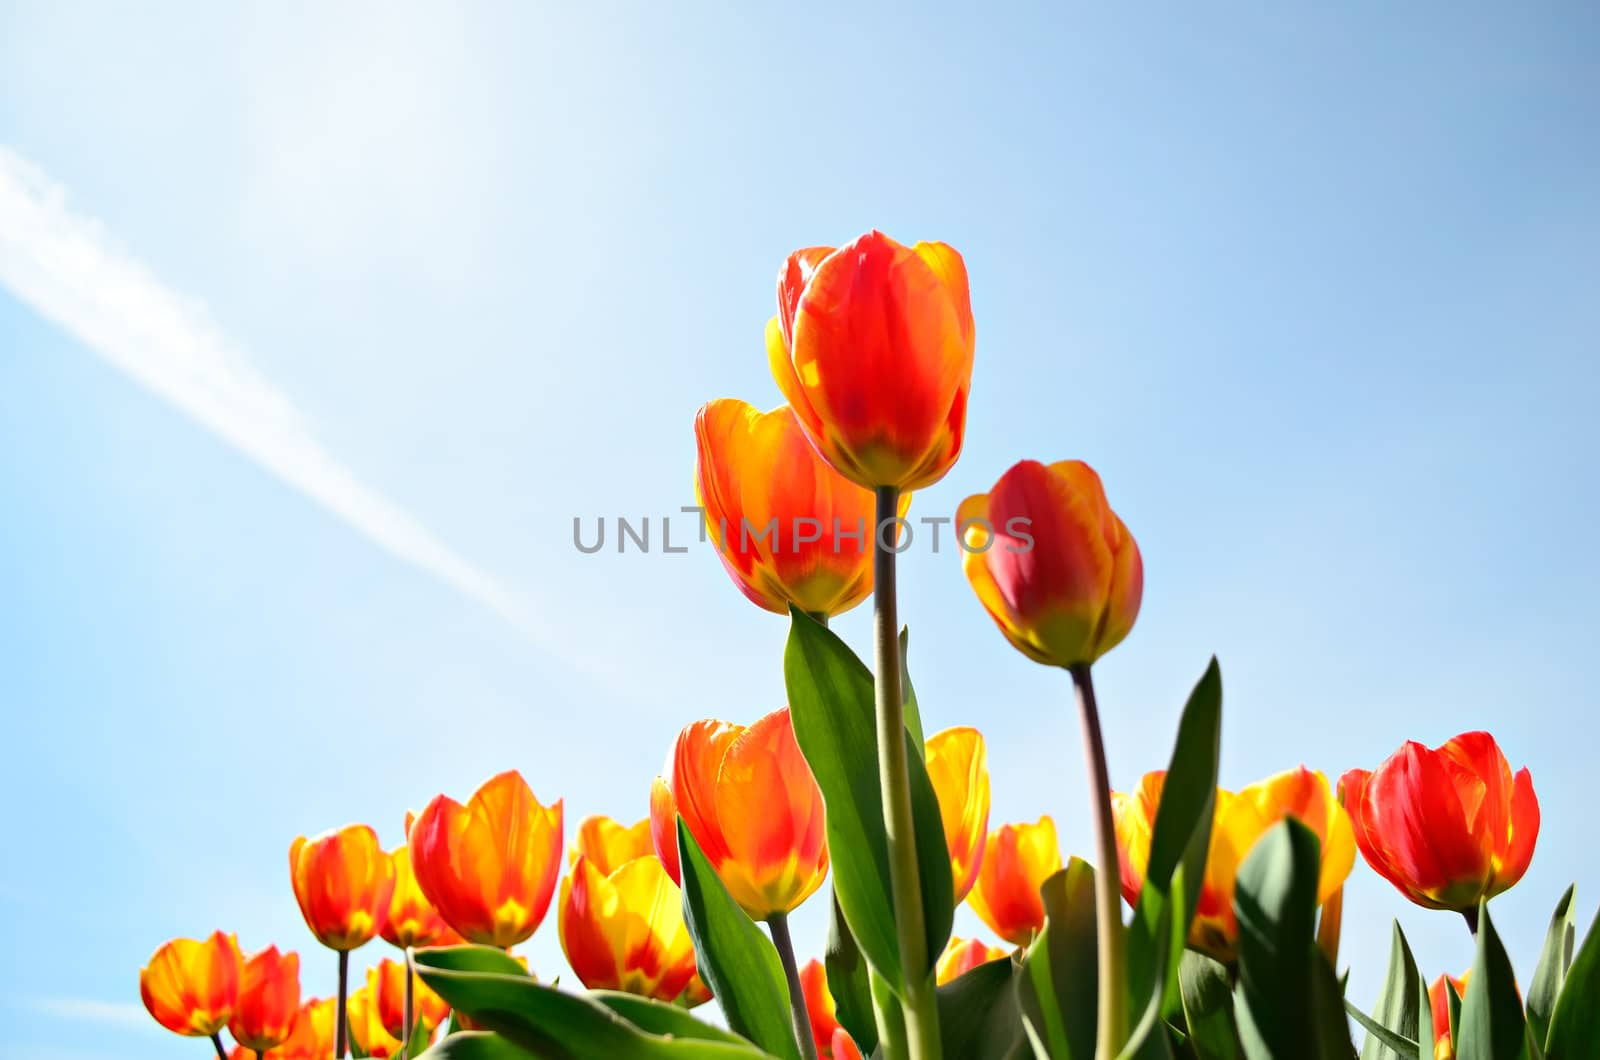 Yellow and red tulips against a blue sky from a low point of view.